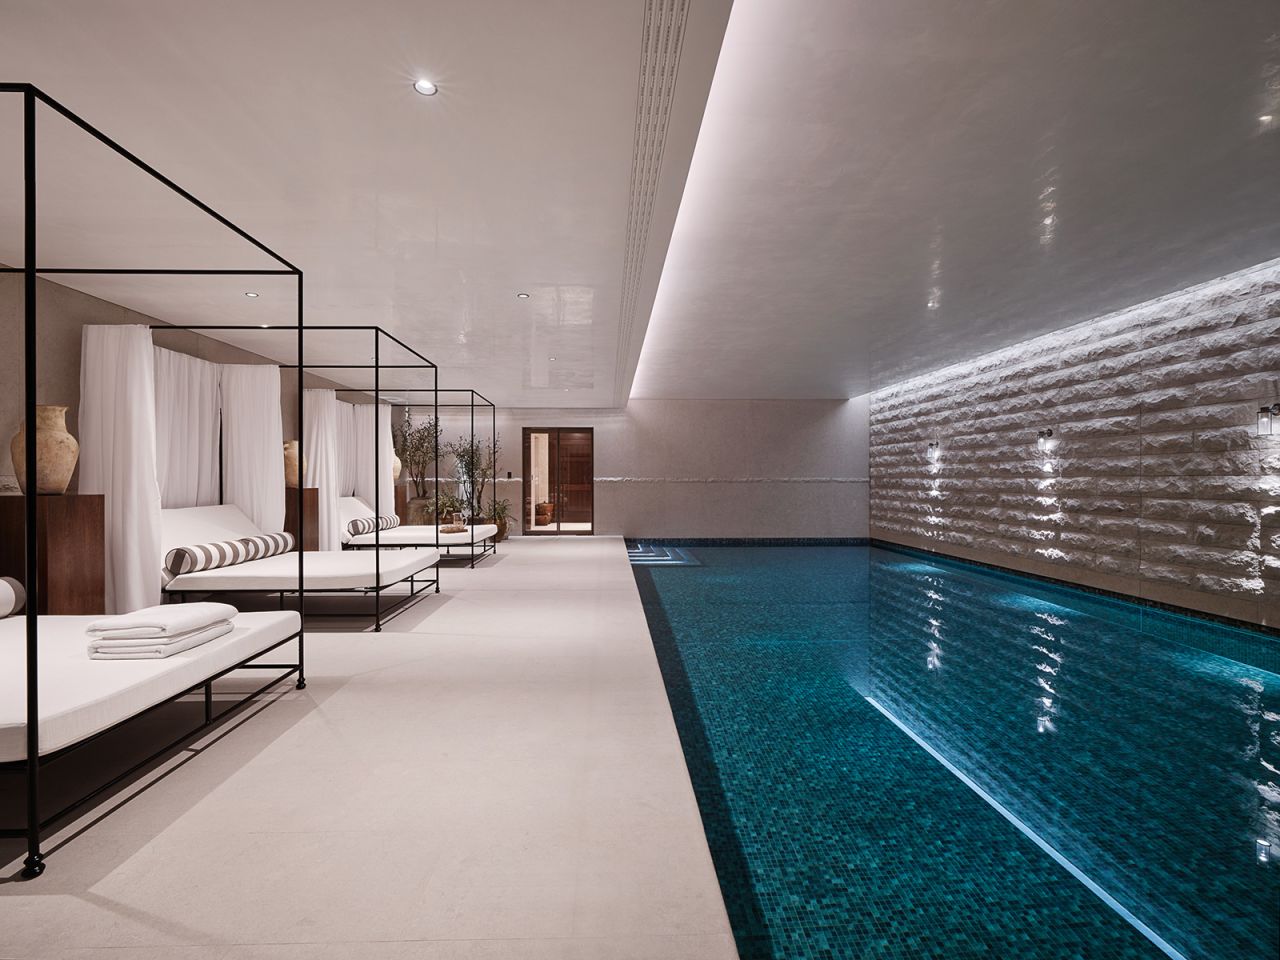 The townhouse includes a 39-foot-long private pool as well as a spa, rooftop terace and screening room.